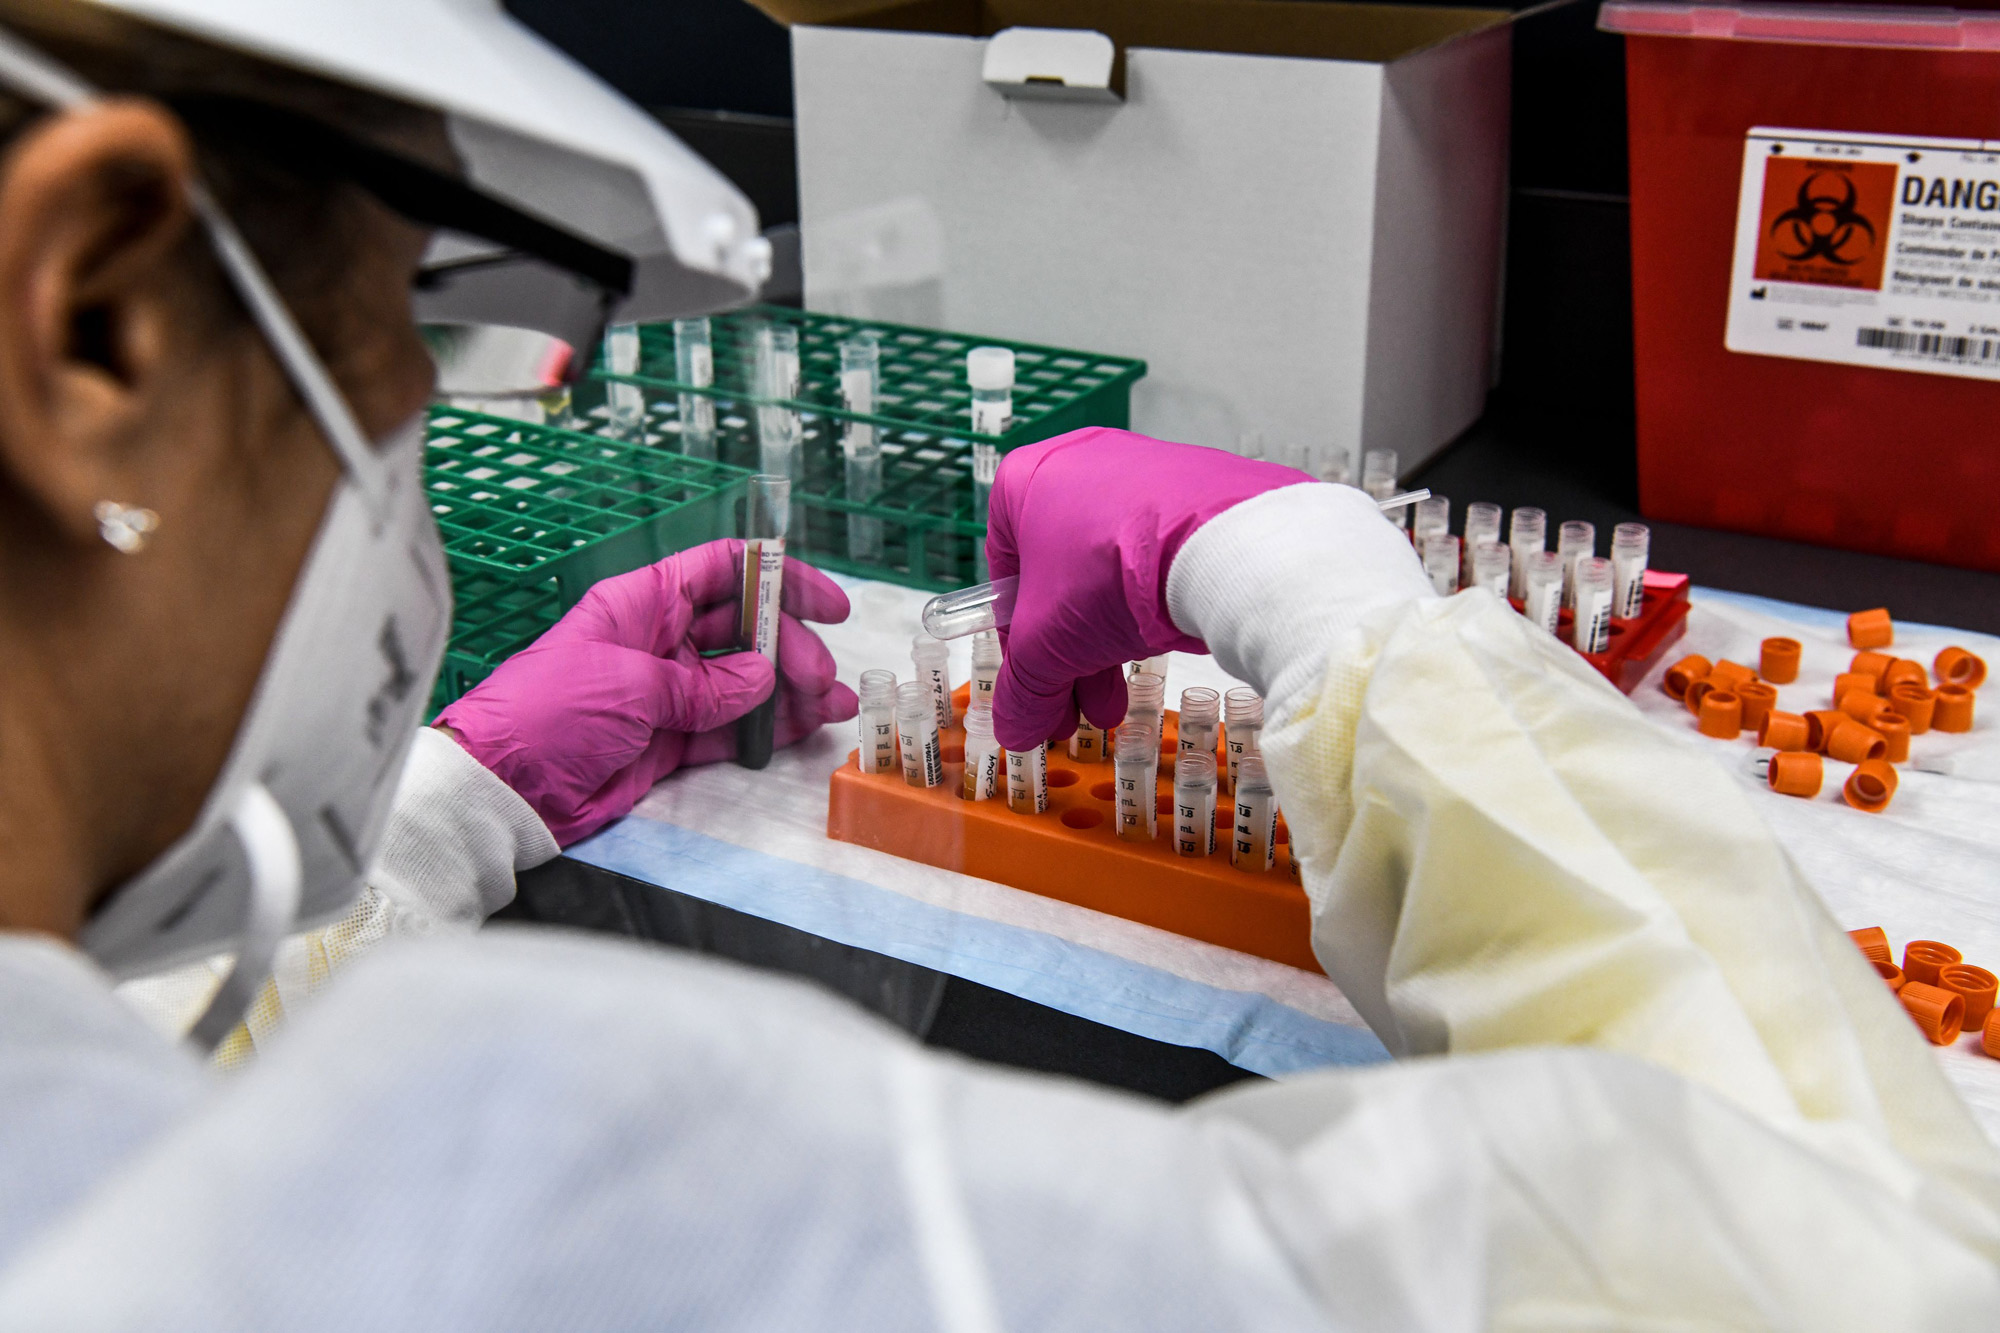 A lab technician sorts blood samples inside a lab for a COVID-19 vaccine study at the Research Centers of America in Hollywood, Florida, on August 13.